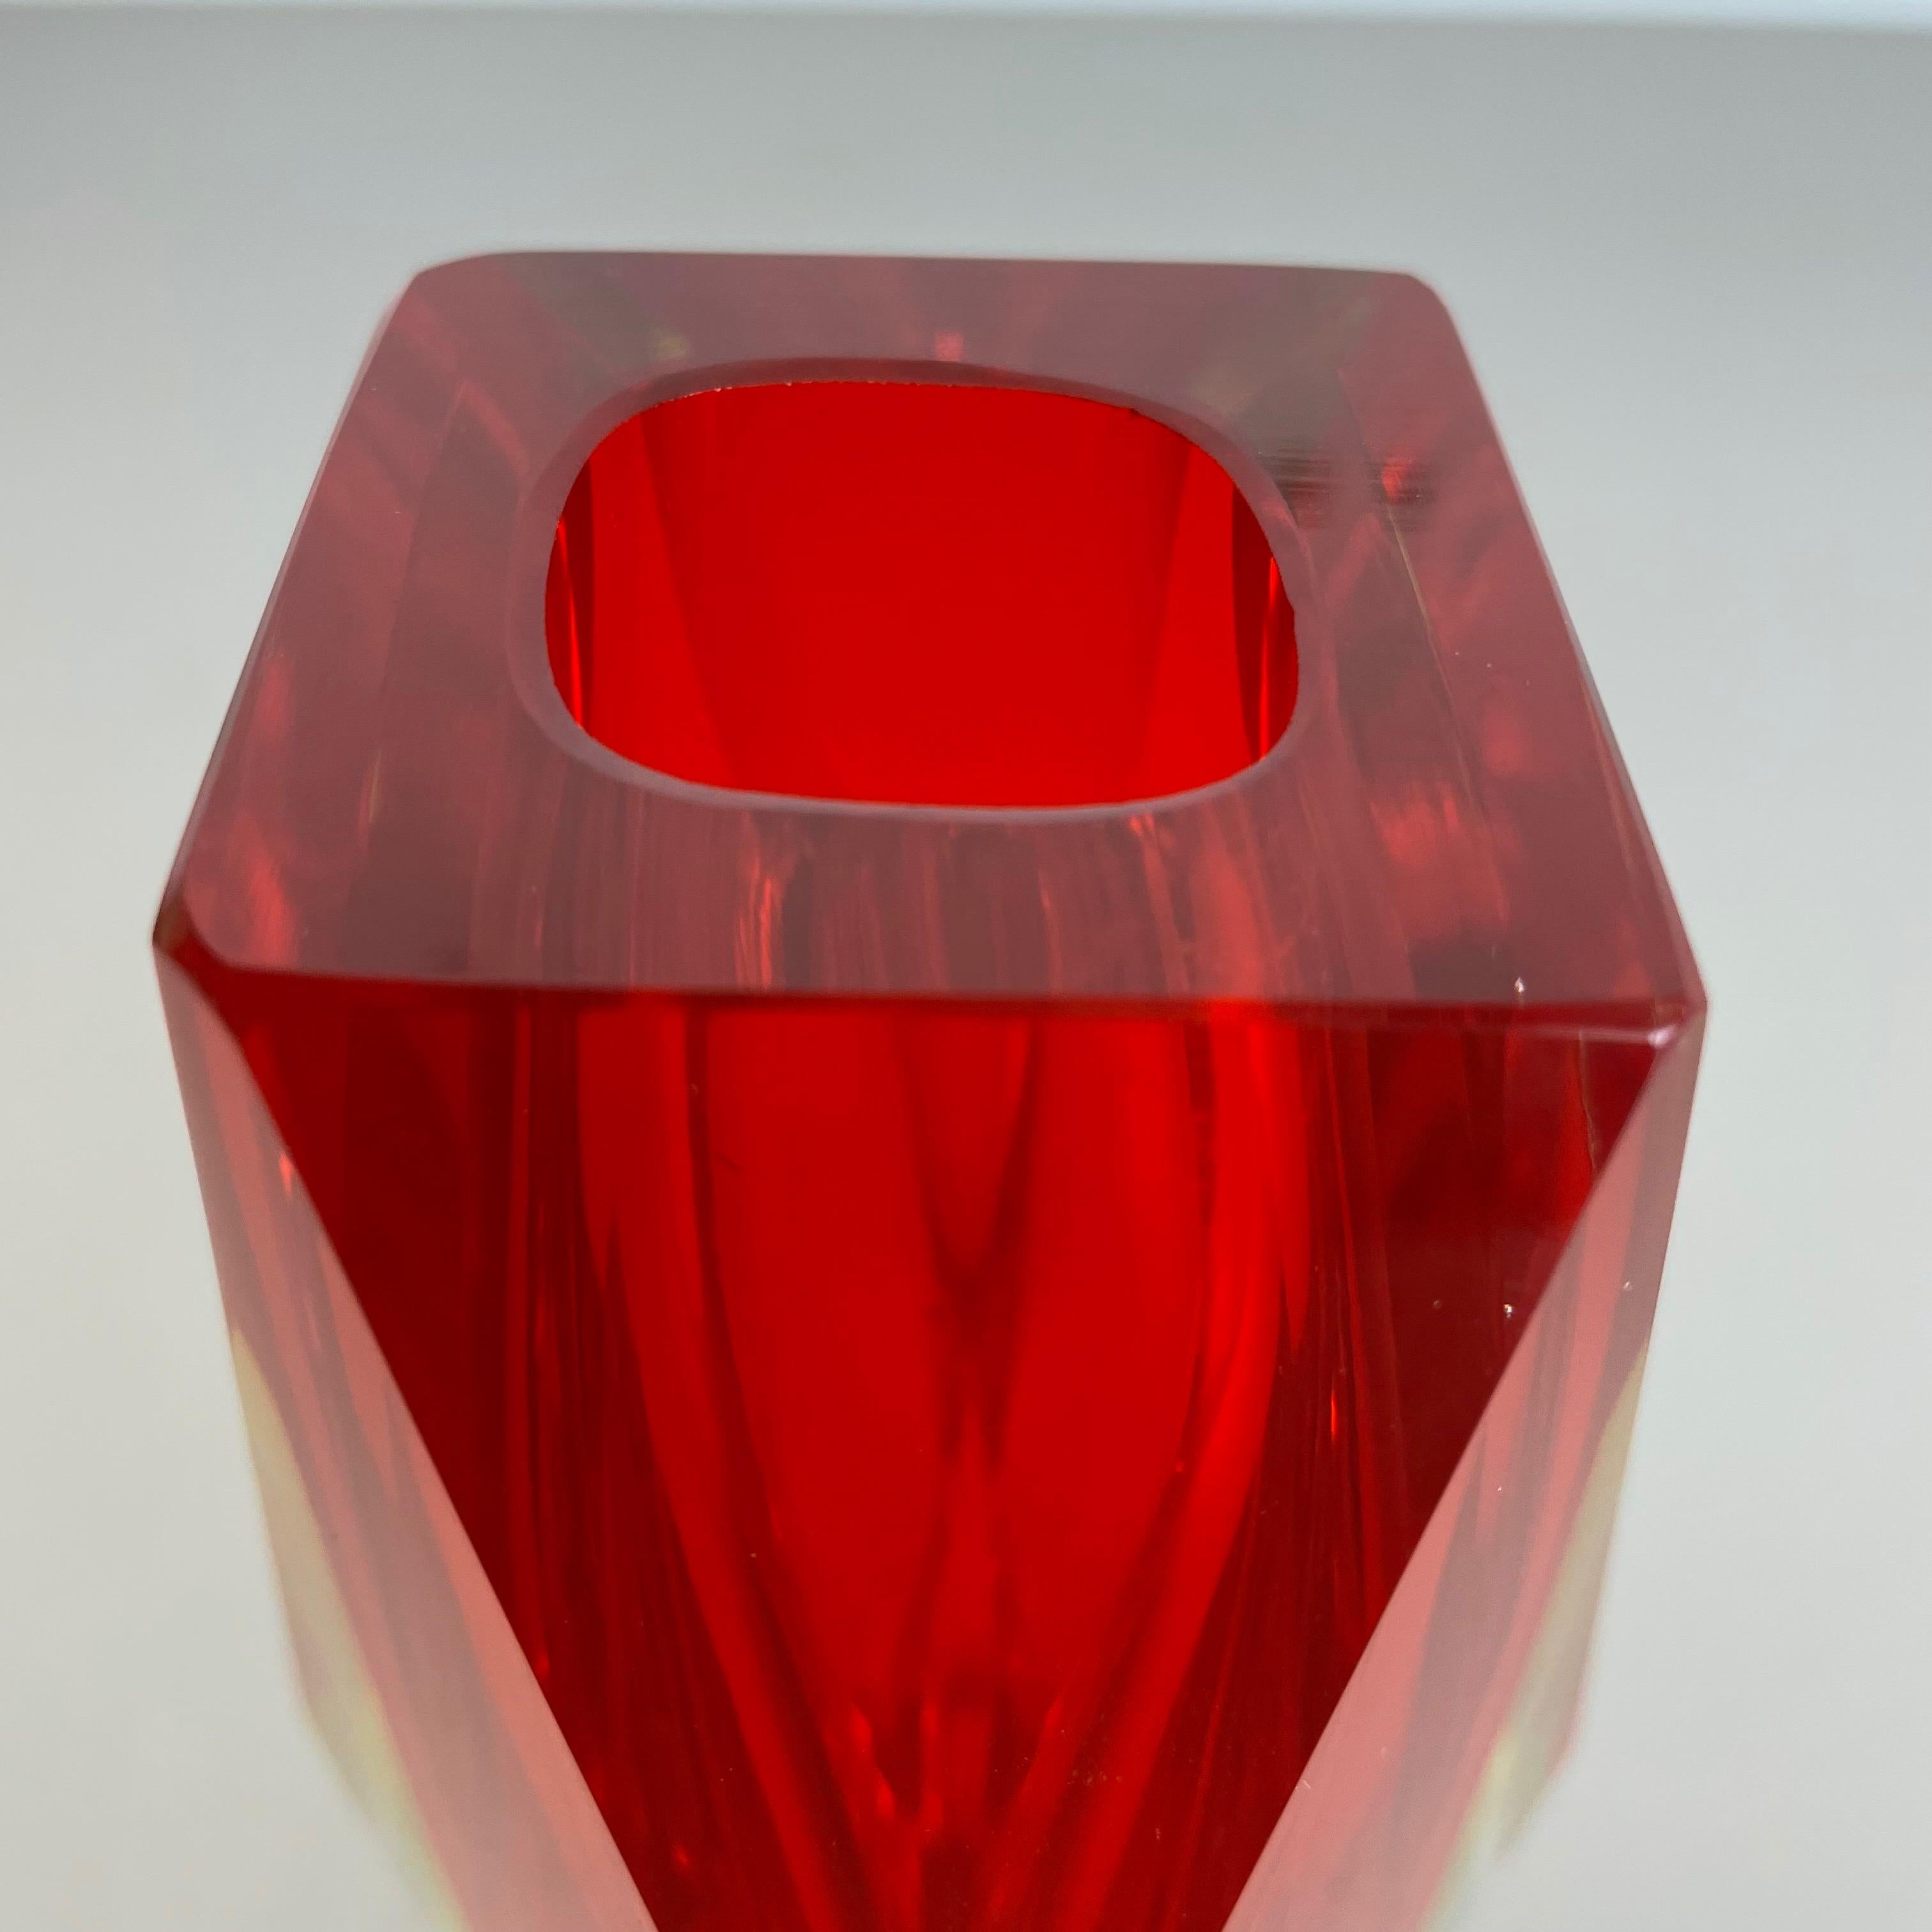 Large Red Murano Glass Sommerso Vase by Flavio Poli Attributed, Italy 1970s For Sale 4